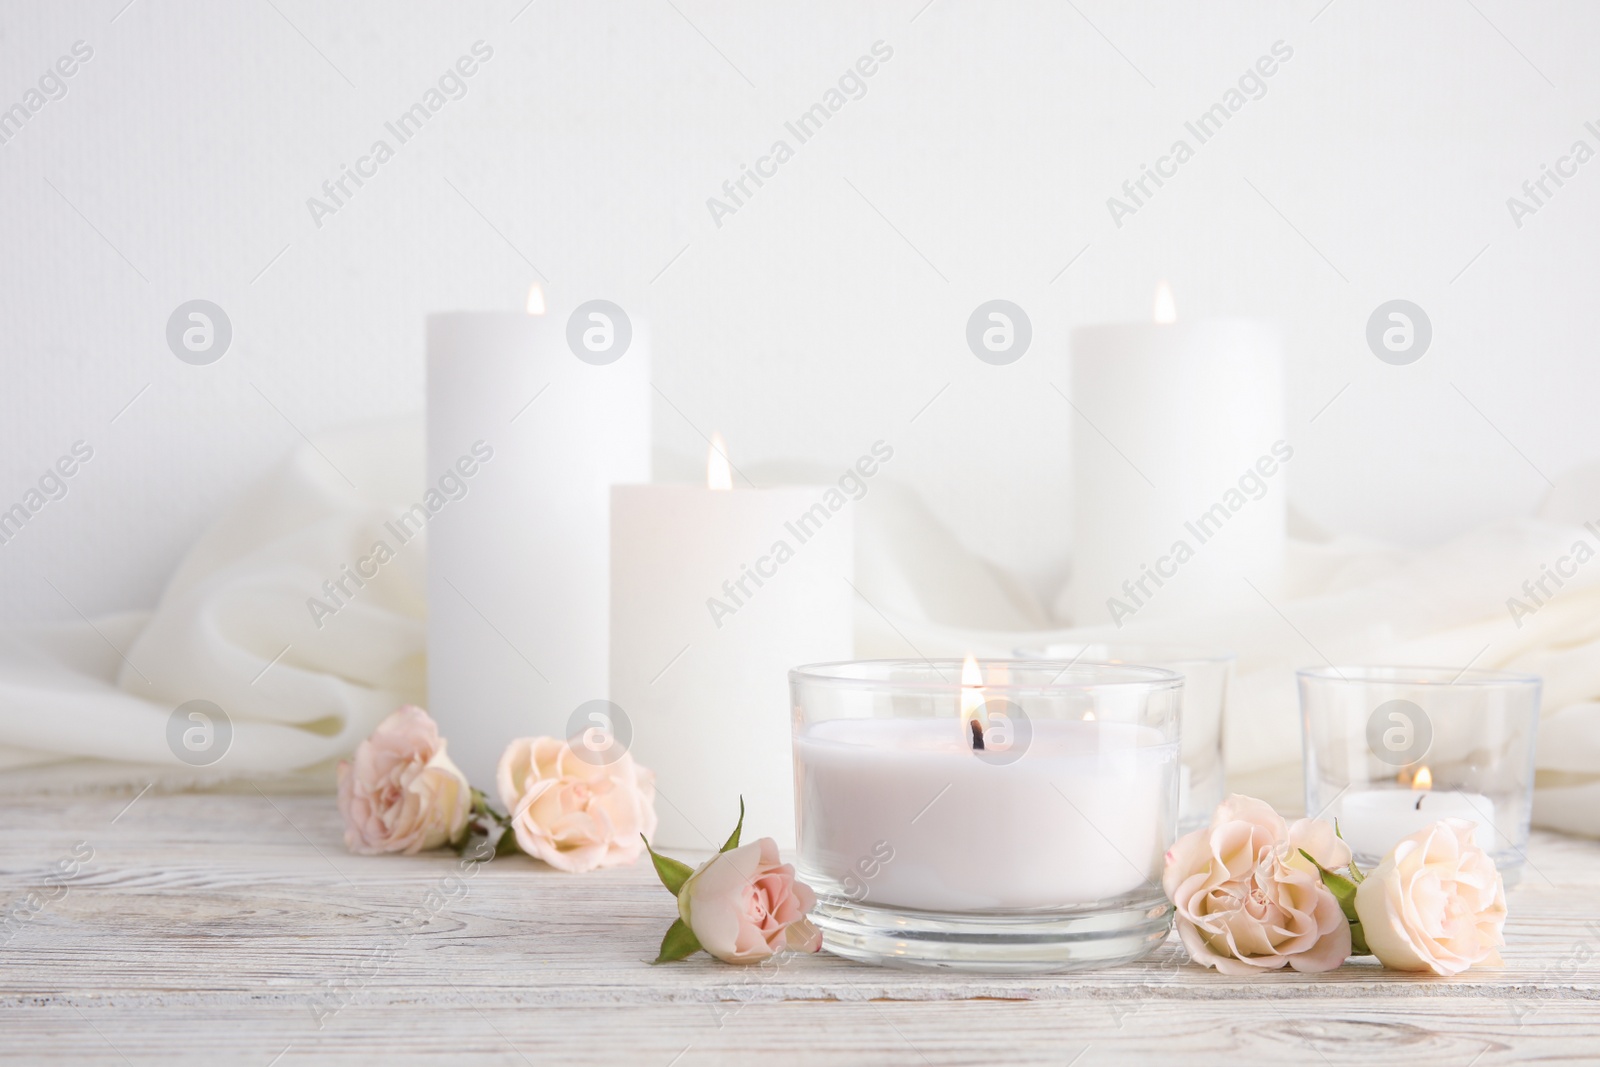 Photo of Composition with burning aromatic candles and roses on wooden table. Space for text